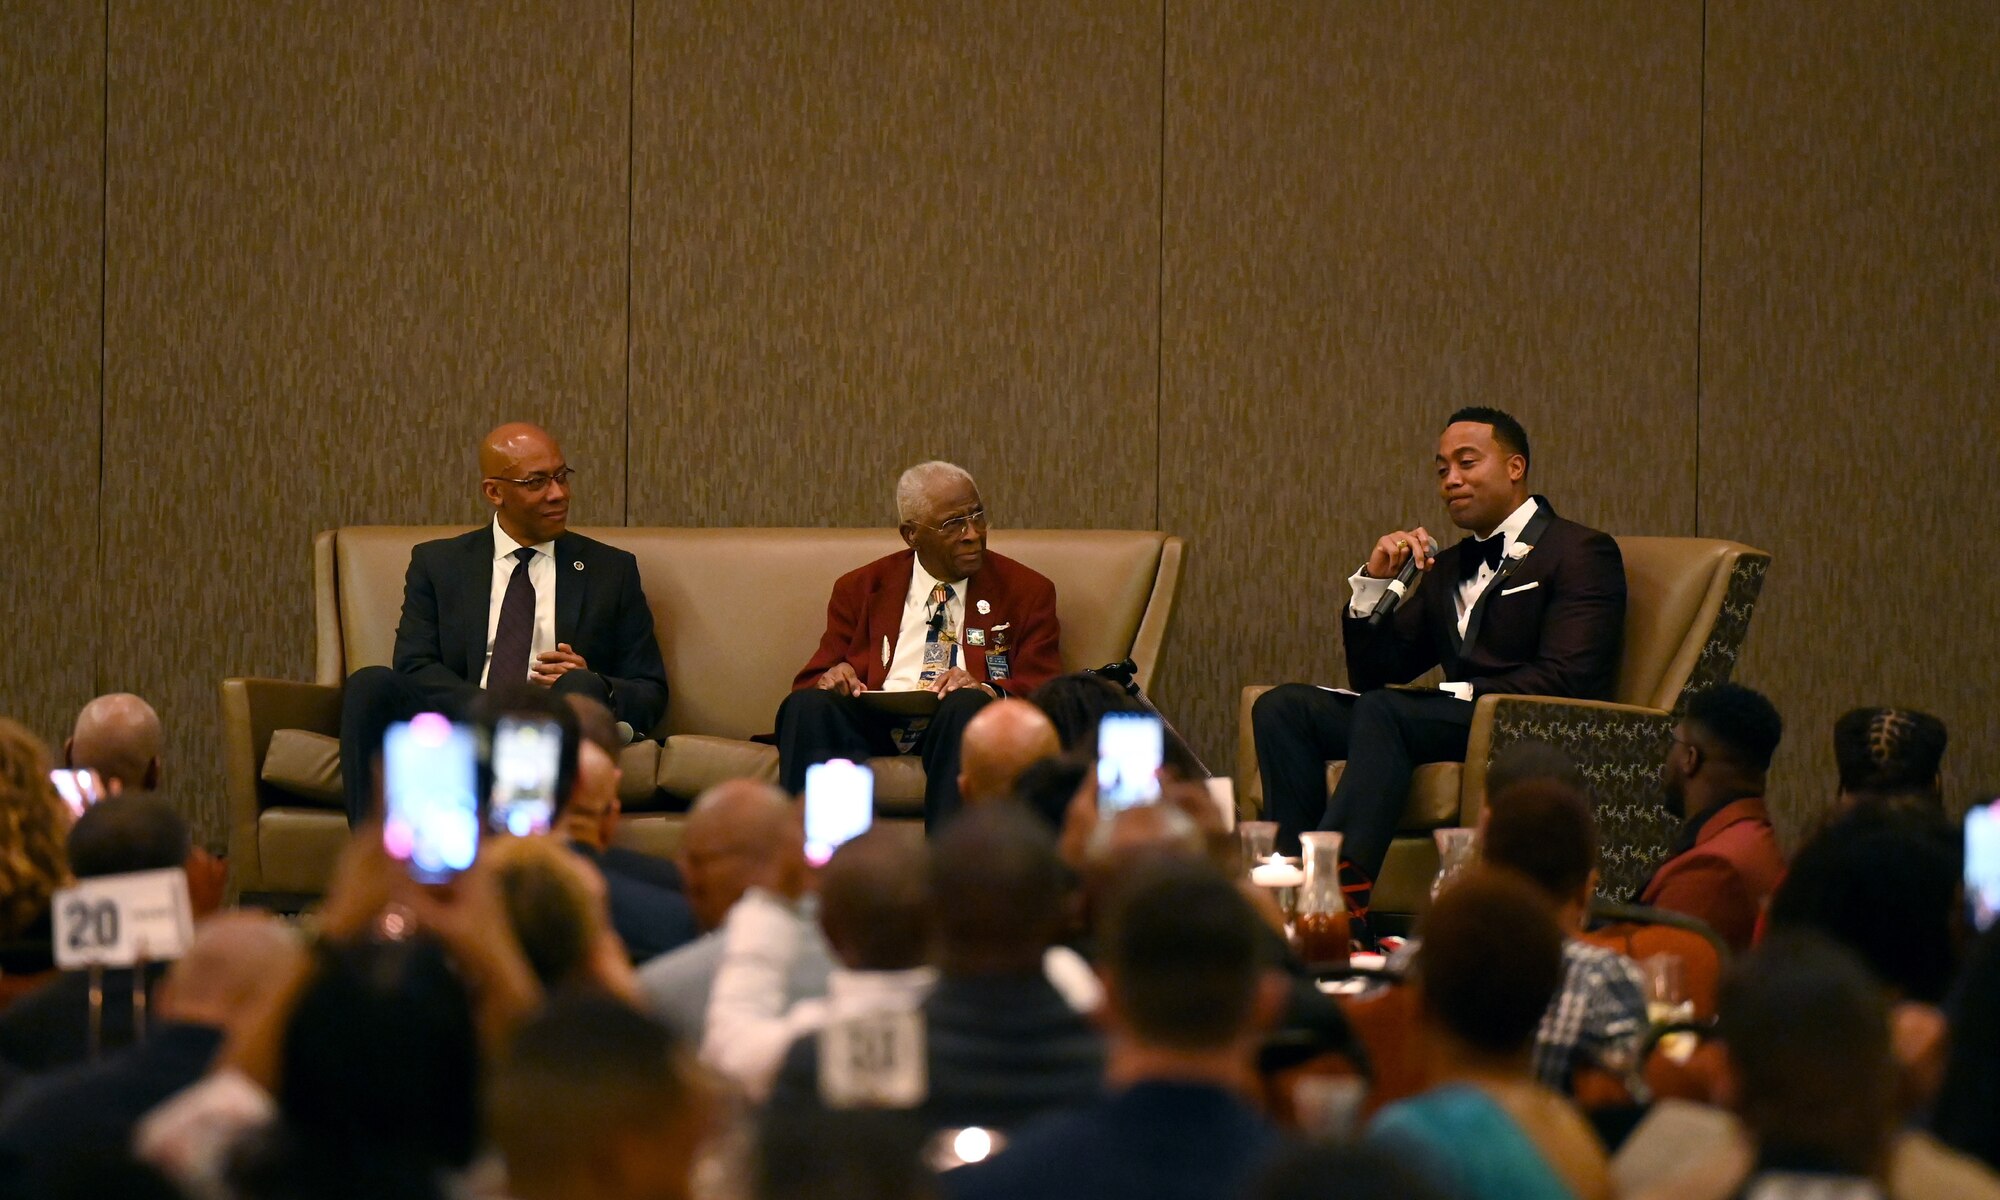 From left, U.S. Air Force Gen. CQ Brown, Jr., Air Force Chief of Staff, retired Lt. Col. James H. Harvey, an original Tuskegee Airman, and Maj. Saj El-Amin, Accelerating the Legacy moderator, participate in a fireside chat during the Accelerating the Legacy 2023 banquet in Charleston, South Carolina, Feb. 16, 2023. Accelerating the Legacy is an aviation heritage event that honors the Tuskegee Airmen’s legacy, offers professional development and networking opportunities to Total Force Airmen, and aims to inspire the next generation of aviation professionals. (U.S. Air Force photo by Tech. Sgt. Alex Fox Echols III)